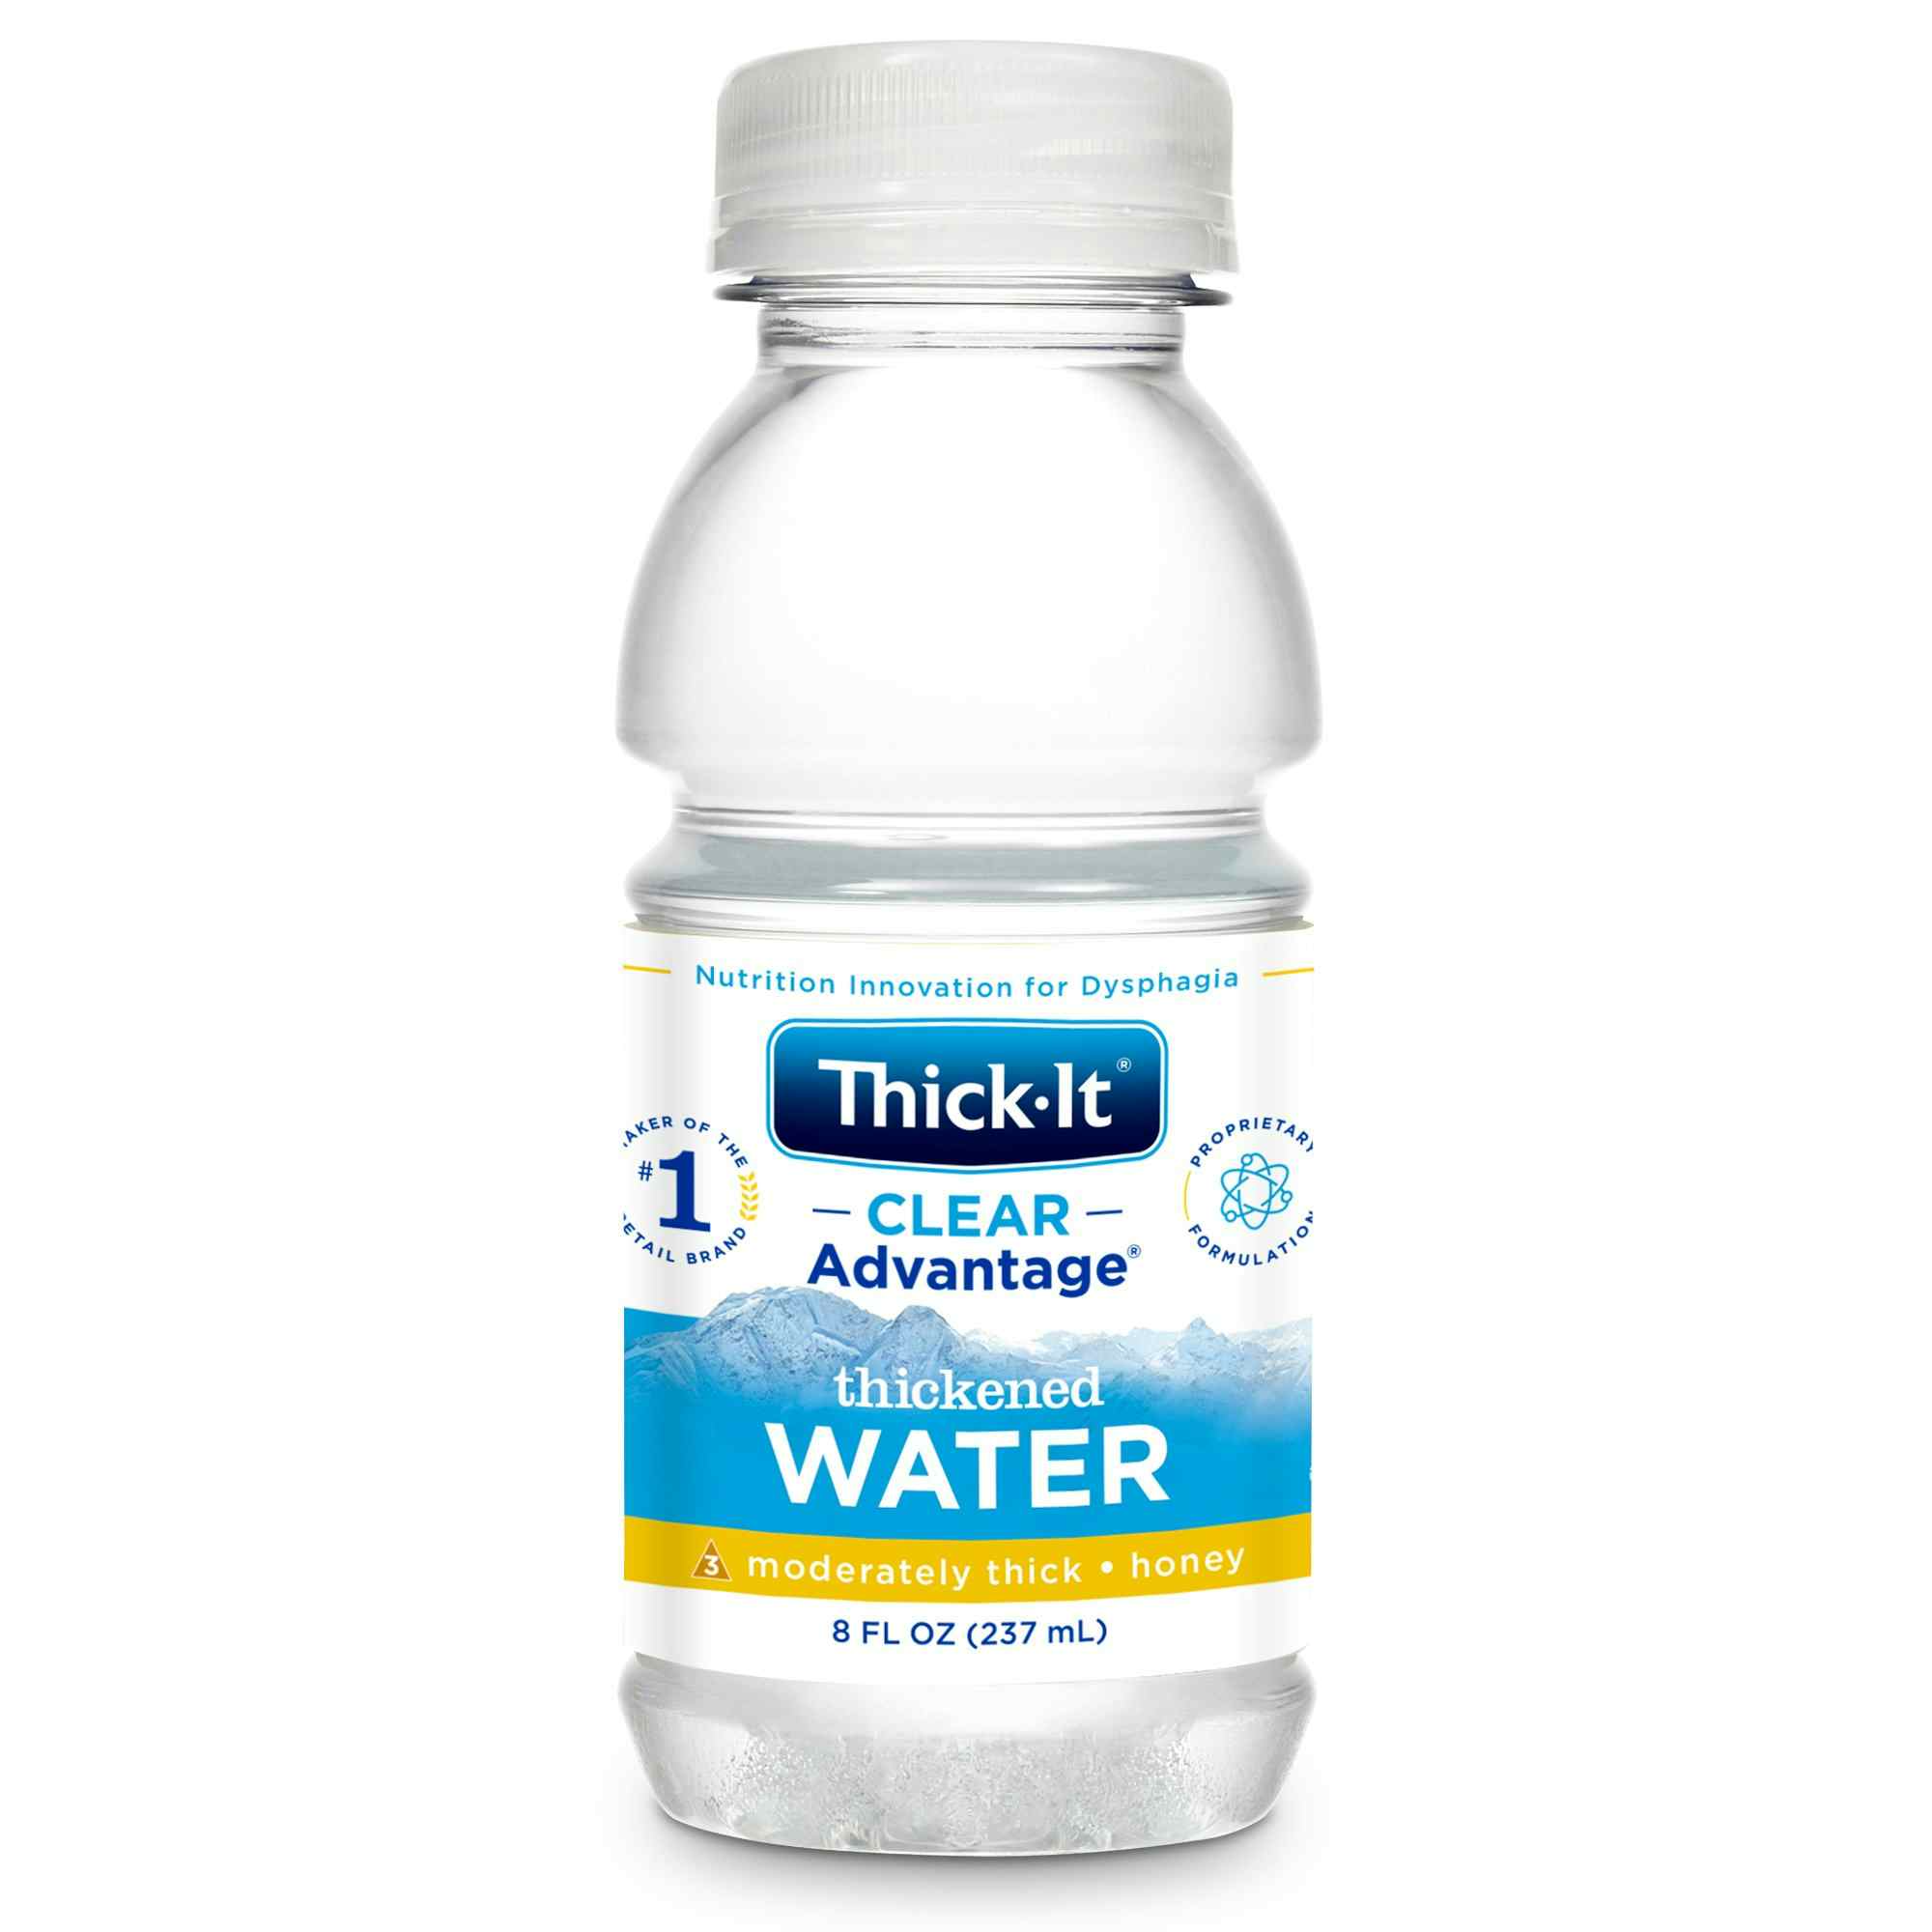 Thick-It Clear Advantage Thickened Water, Honey Consistency, Moderately Thick